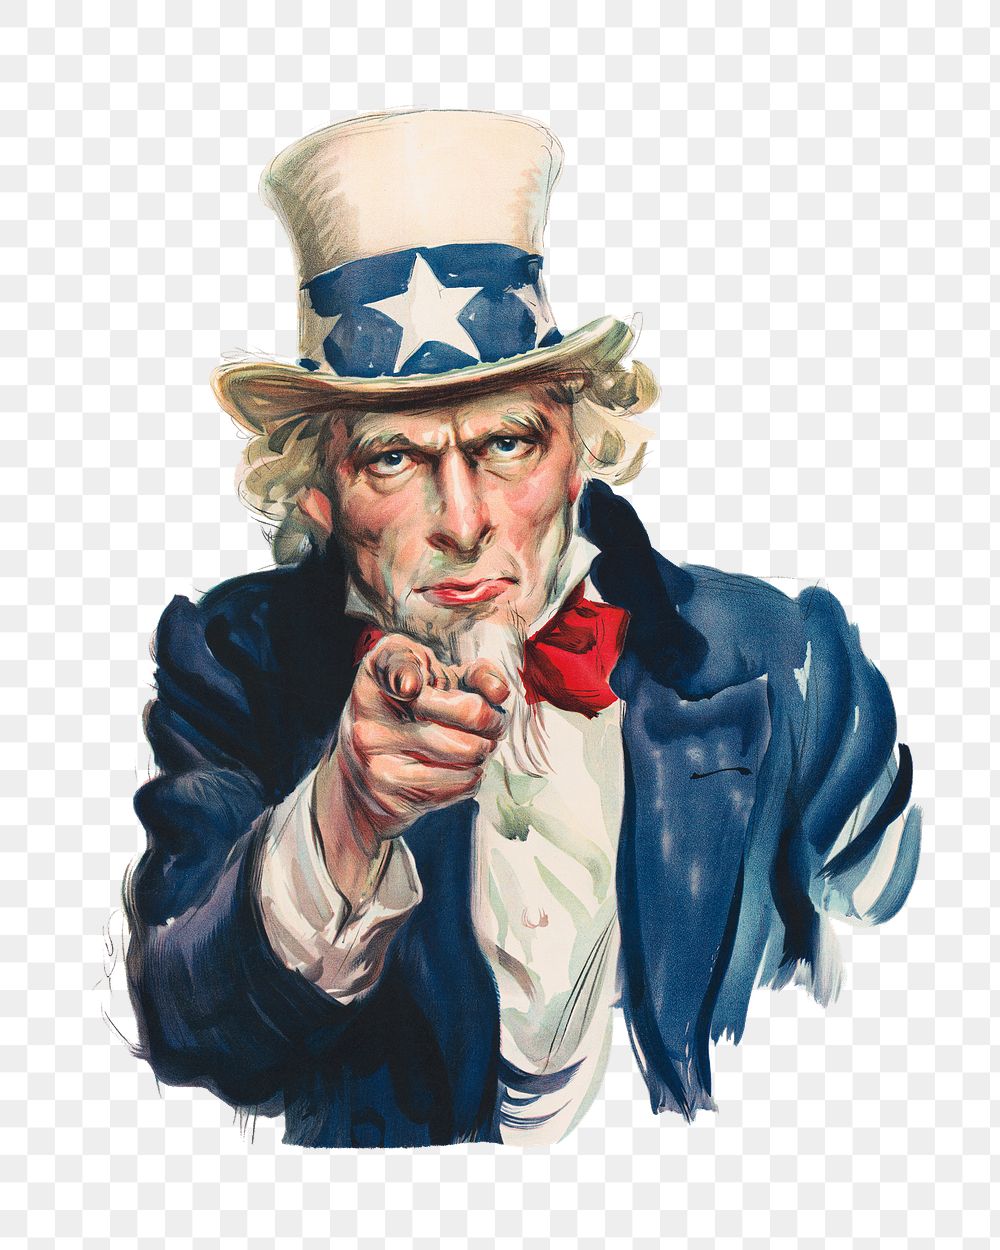 Aesthetic US's Uncle sam png on transparent background.   Remastered by rawpixel